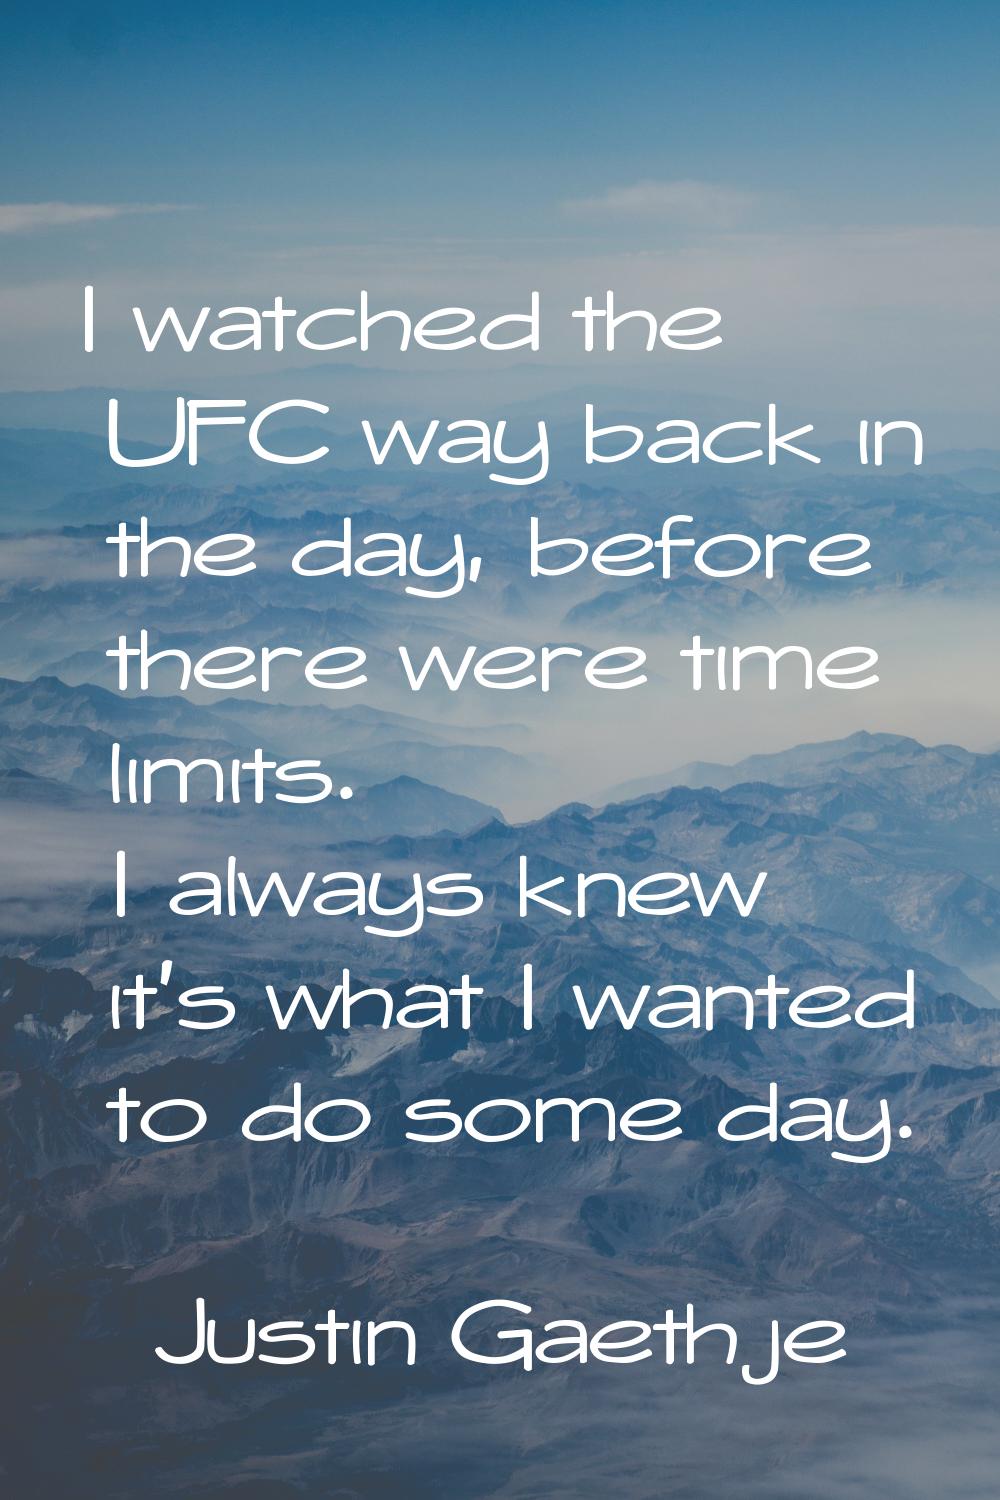 I watched the UFC way back in the day, before there were time limits. I always knew it's what I wan